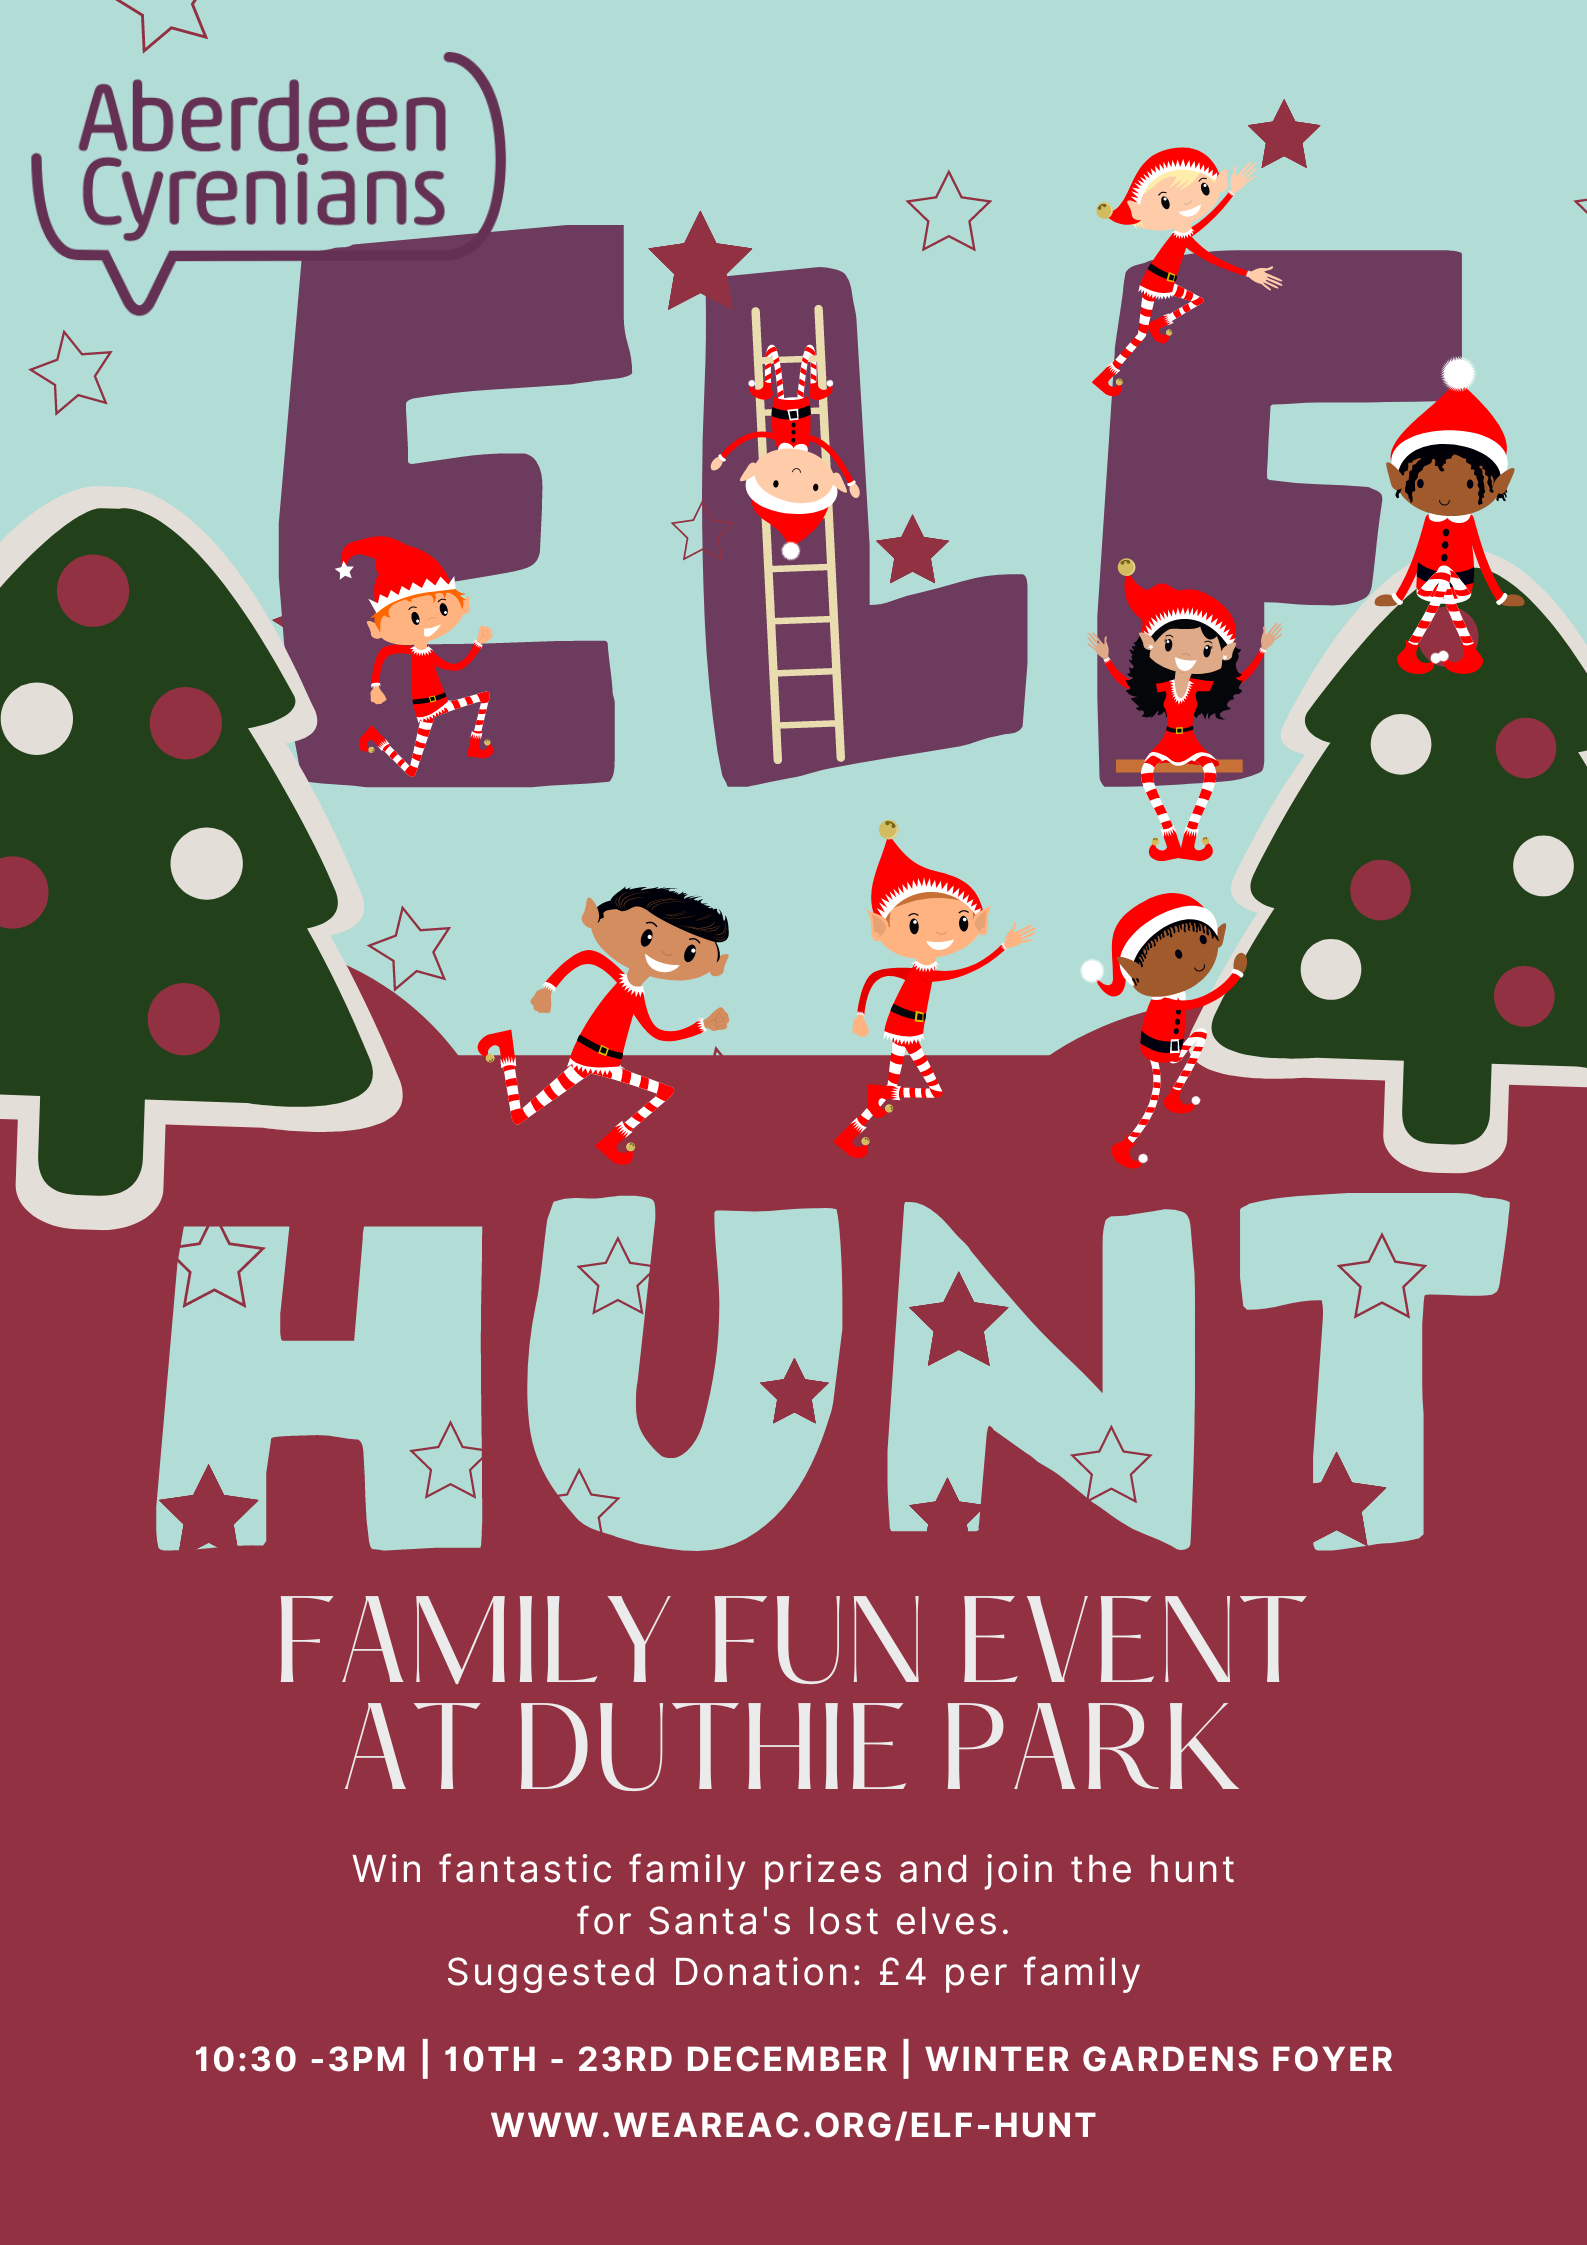 Aberdeen Cyrenians to host family fun event to search for misbehaving elves and win prizes